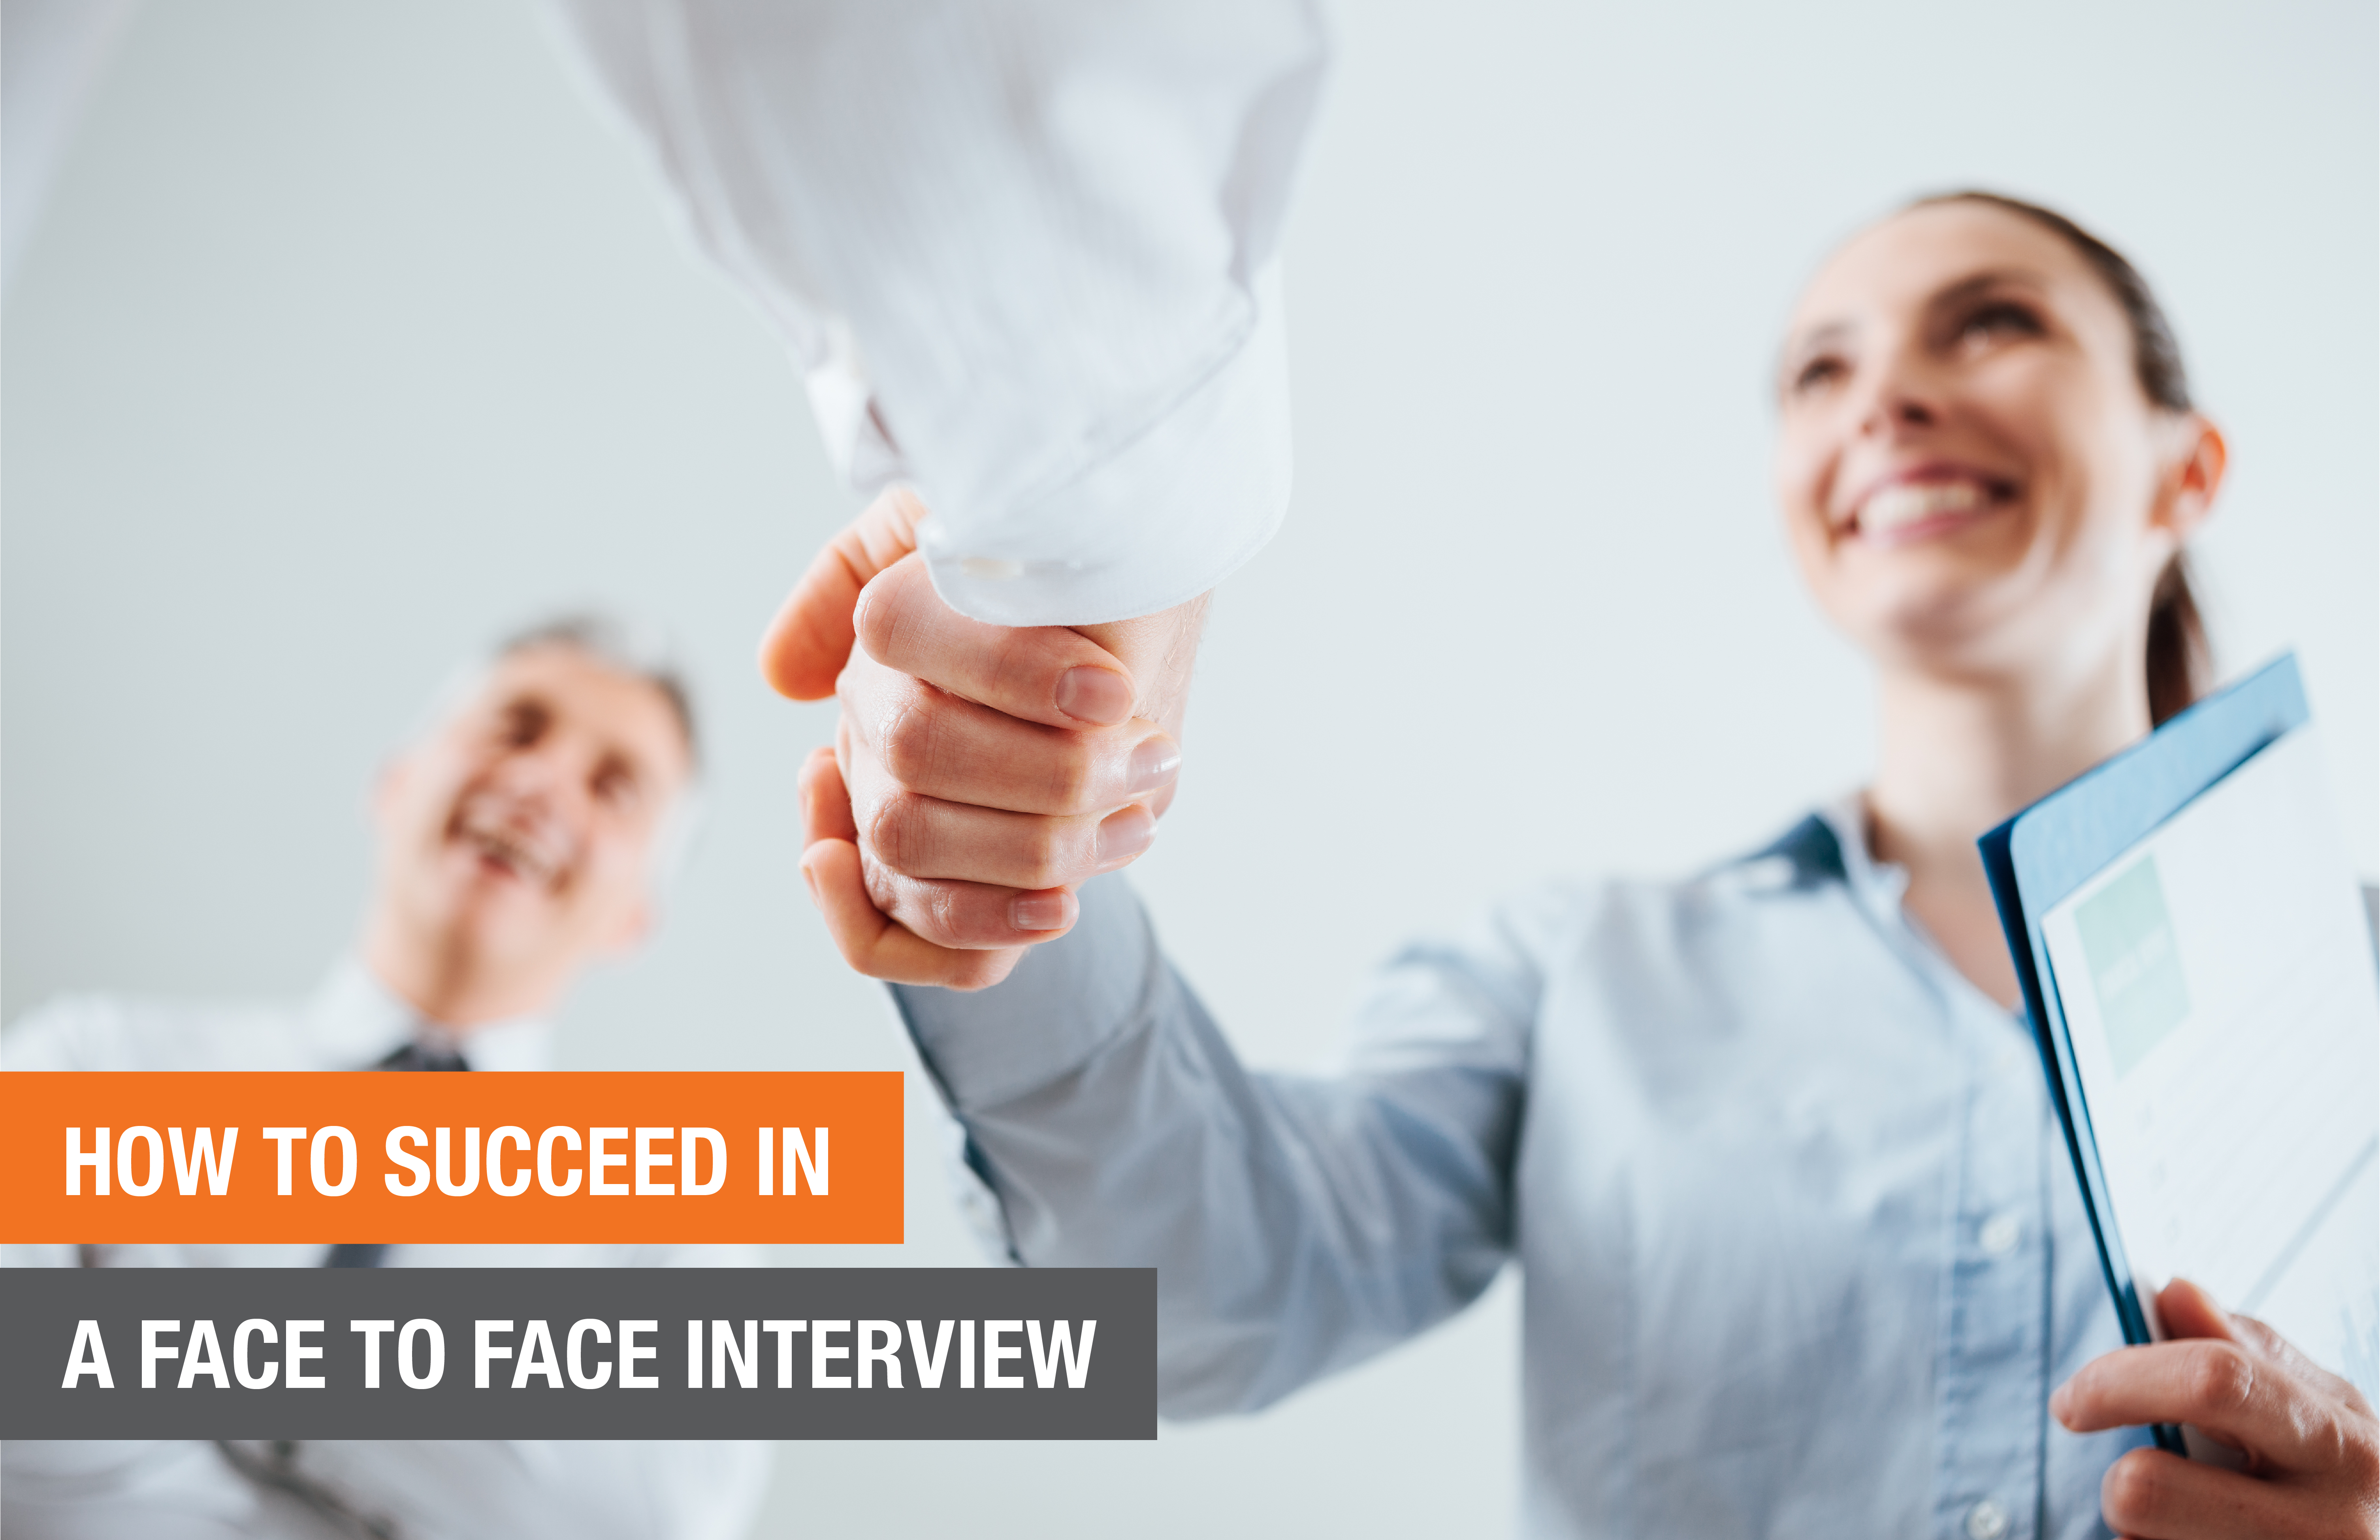 How to succeed at face to face job interviews